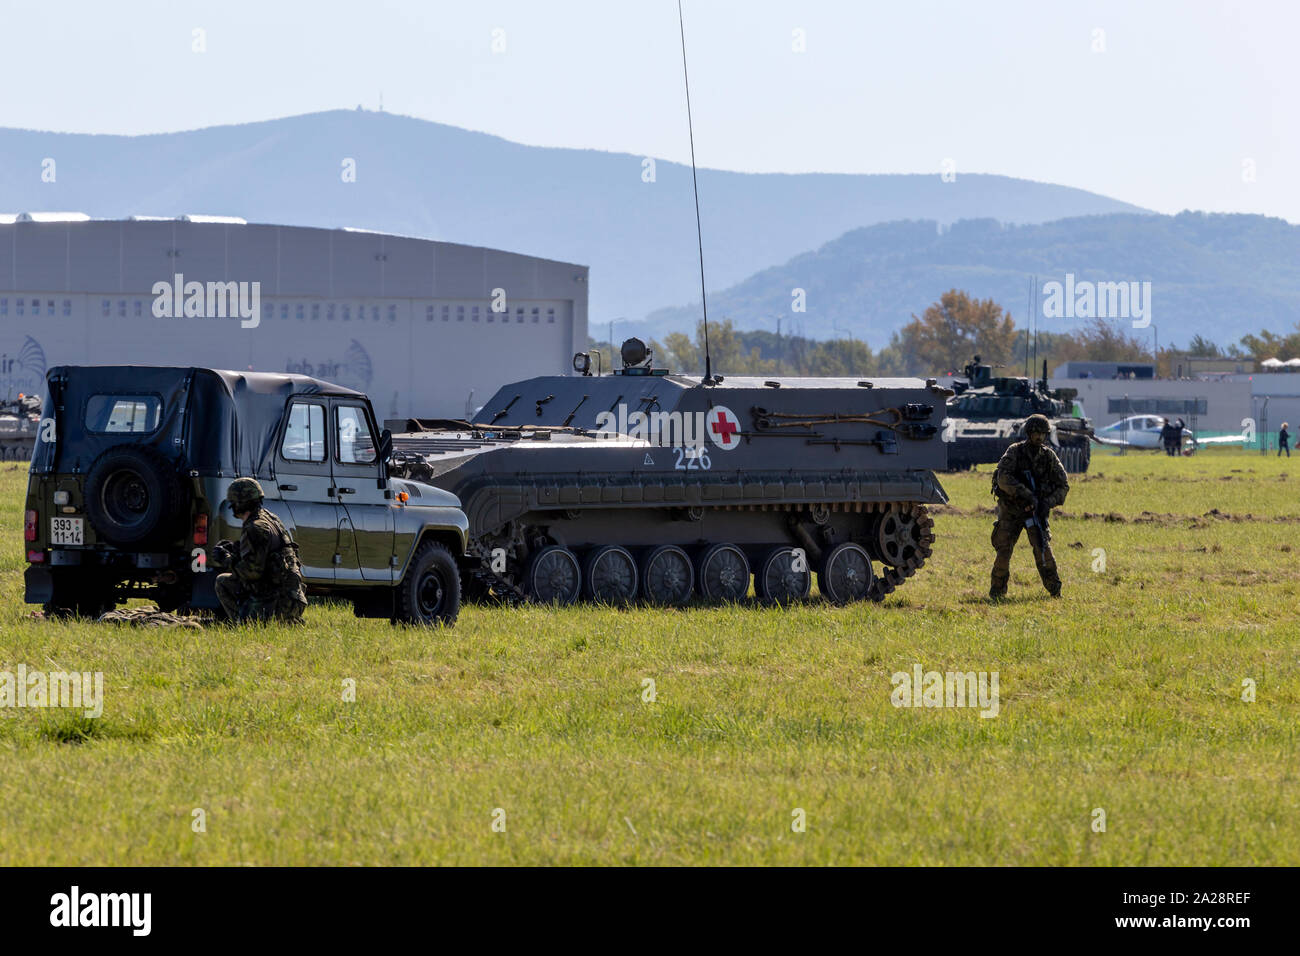 OSTRAVA, CZECH REPUBLIC - SEPTEMBER 22, 2019: NATO Days. UAZ command vehicle and a tracked medevac vehicle on the battlefield. Stock Photo